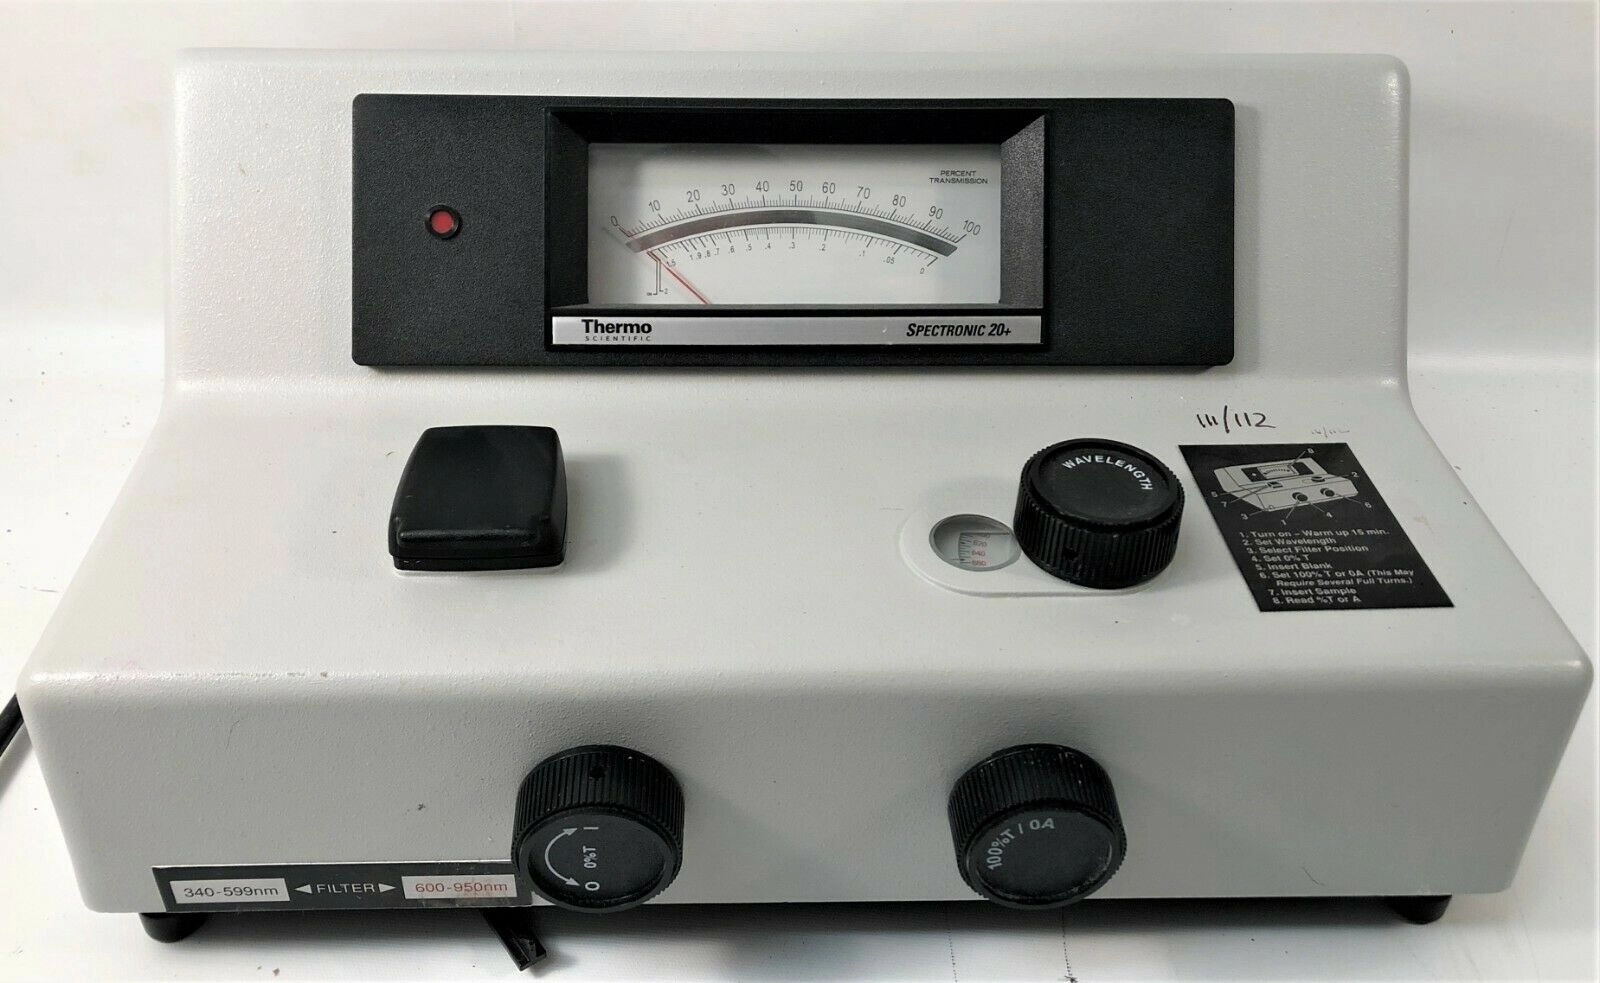 Thermo Spectronic 20+ Visible Spectrophotometer - 340 to 950nm